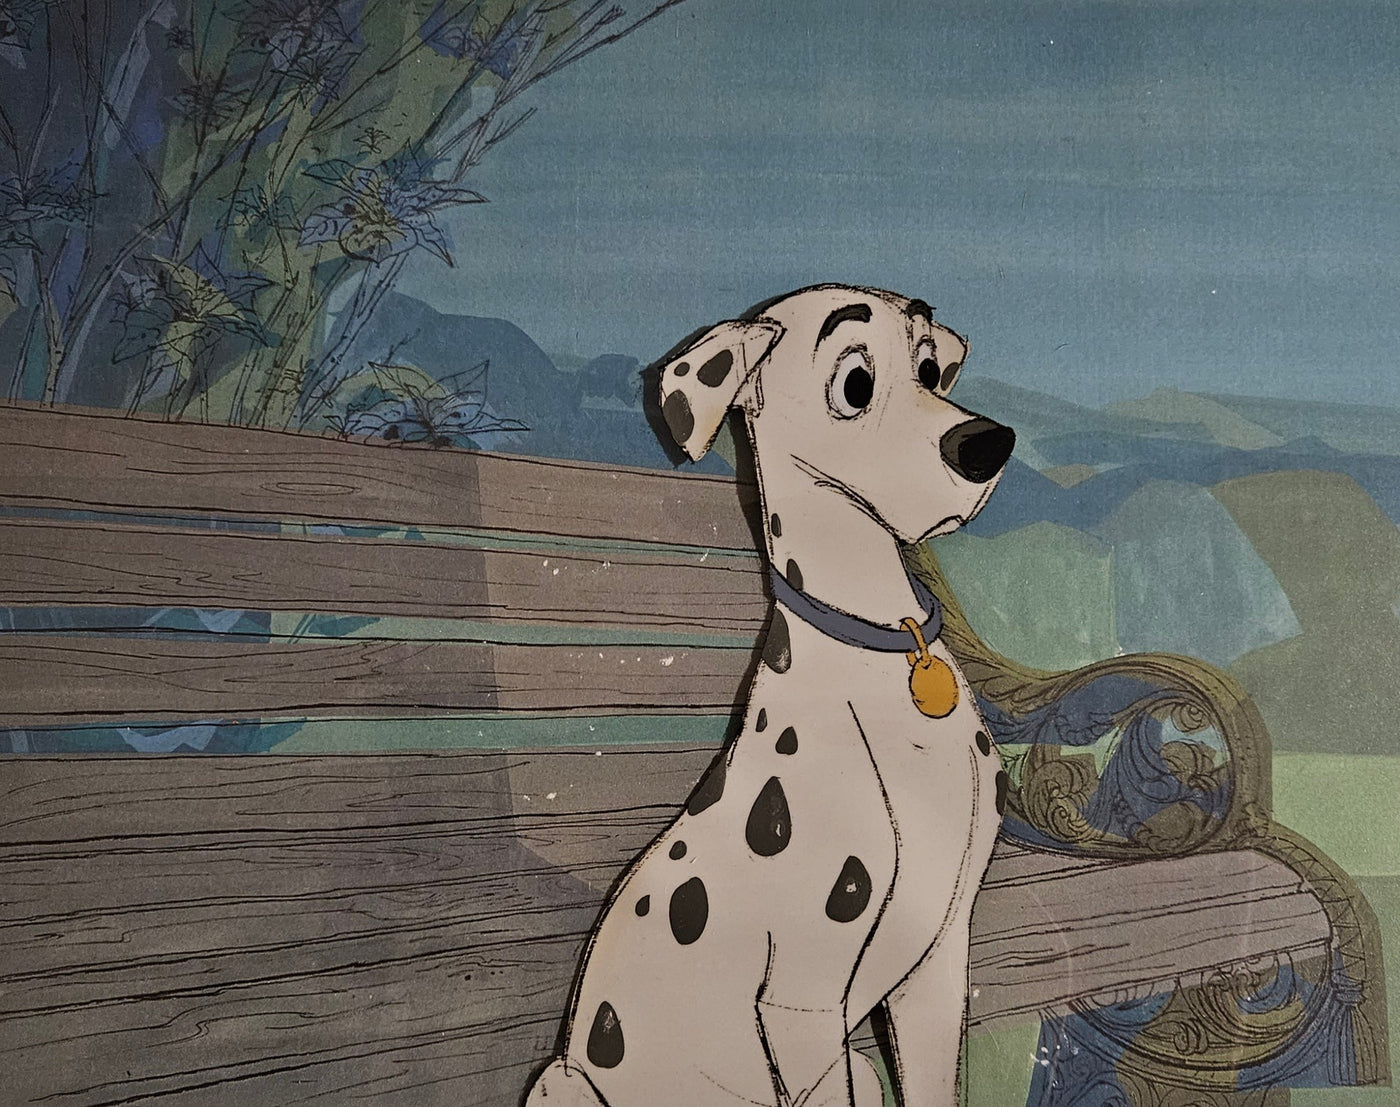 Original Walt Disney Production Cel from One Hundred and One Dalmatians featuring Perdita